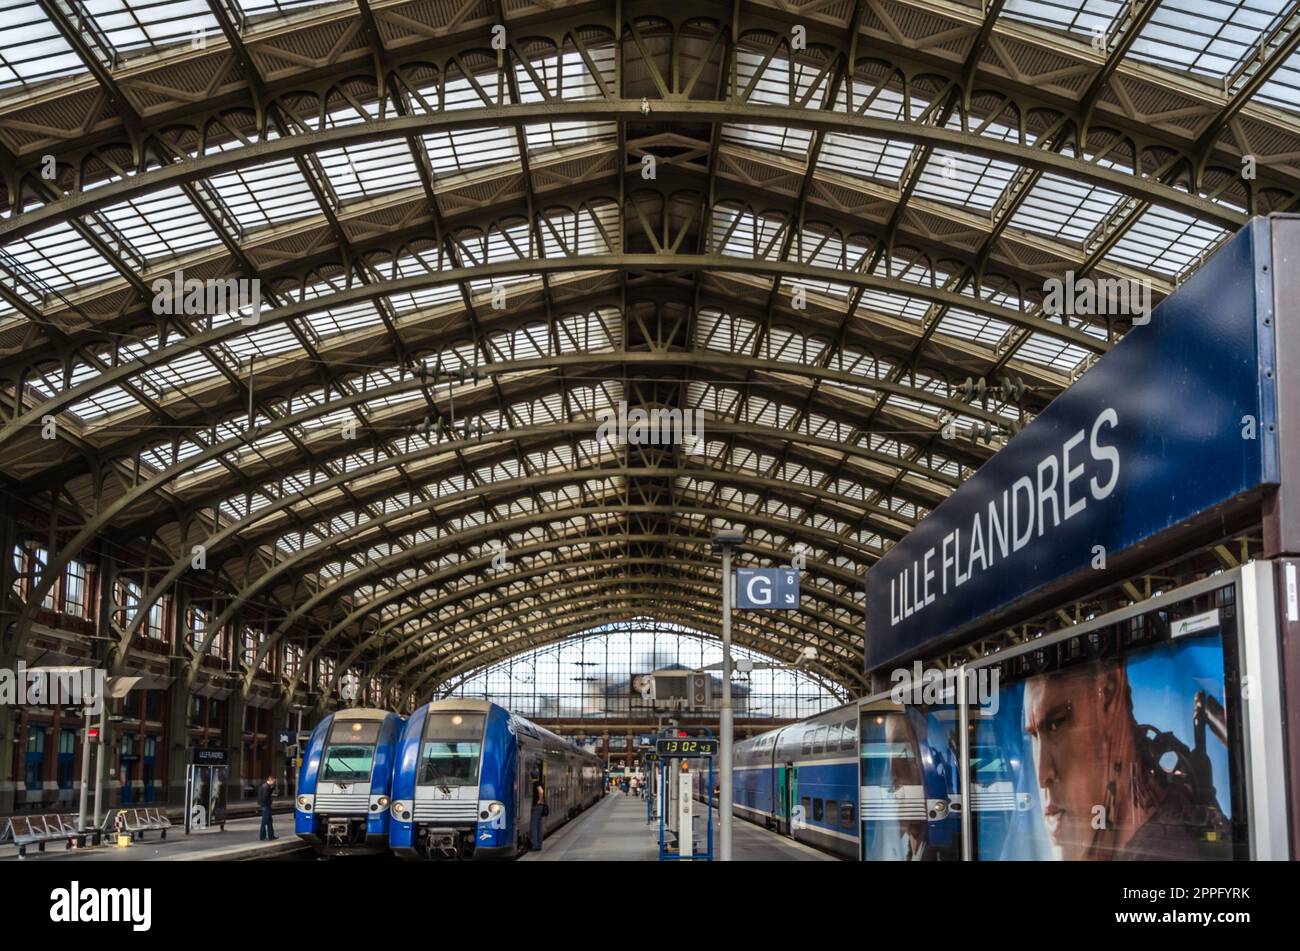 LILLE, FRANCE - AUGUST 17, 2013: Trains at Lille-Flandres railway station, northern France Stock Photo